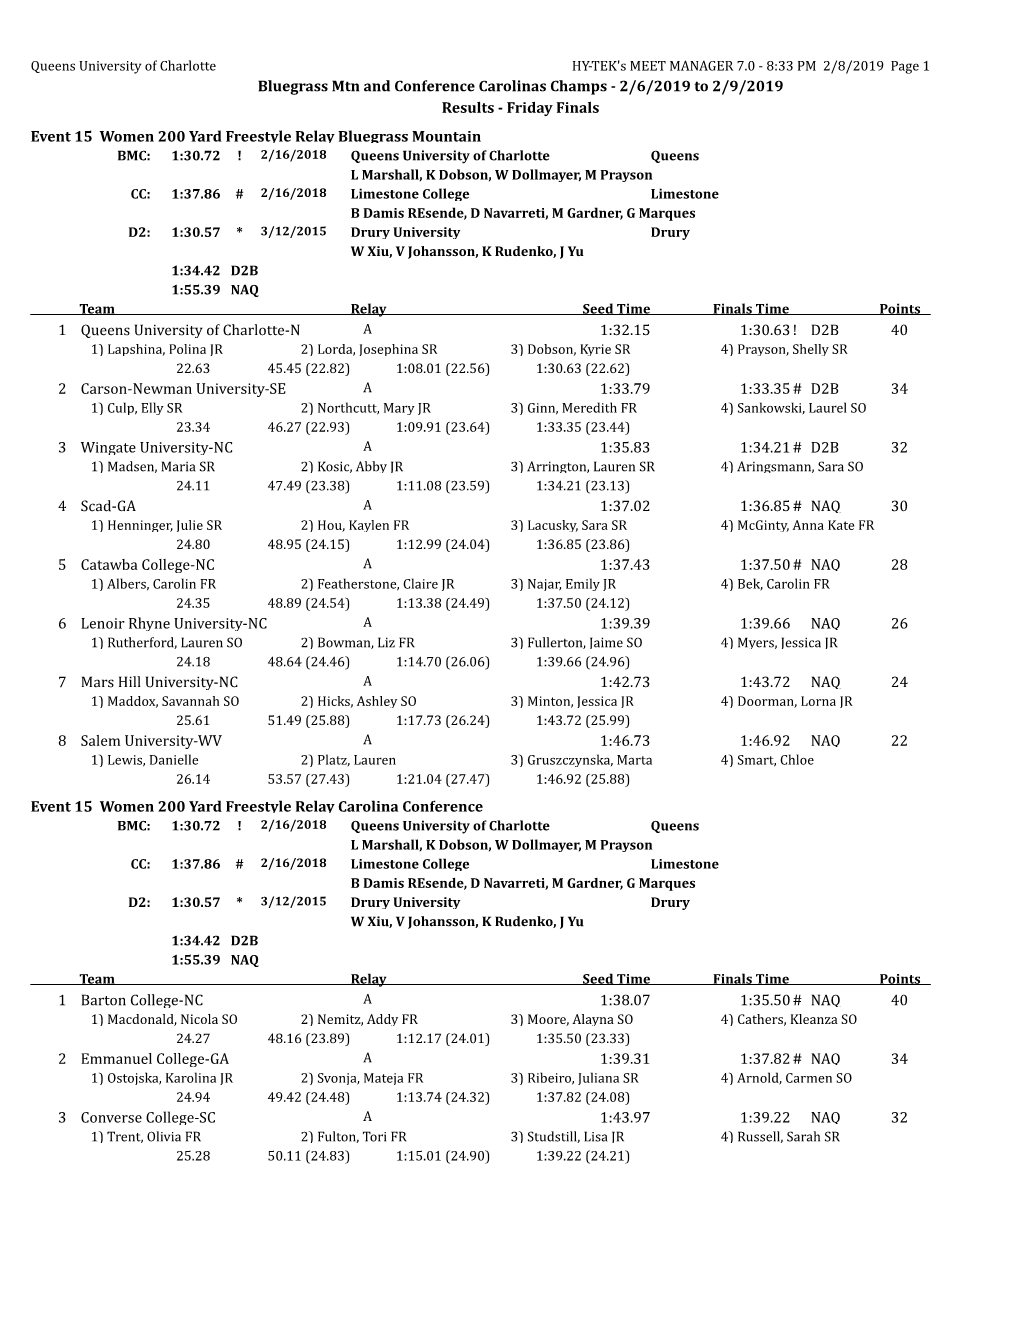 Friday Finals Event 15 Women 200 Yard Freestyle